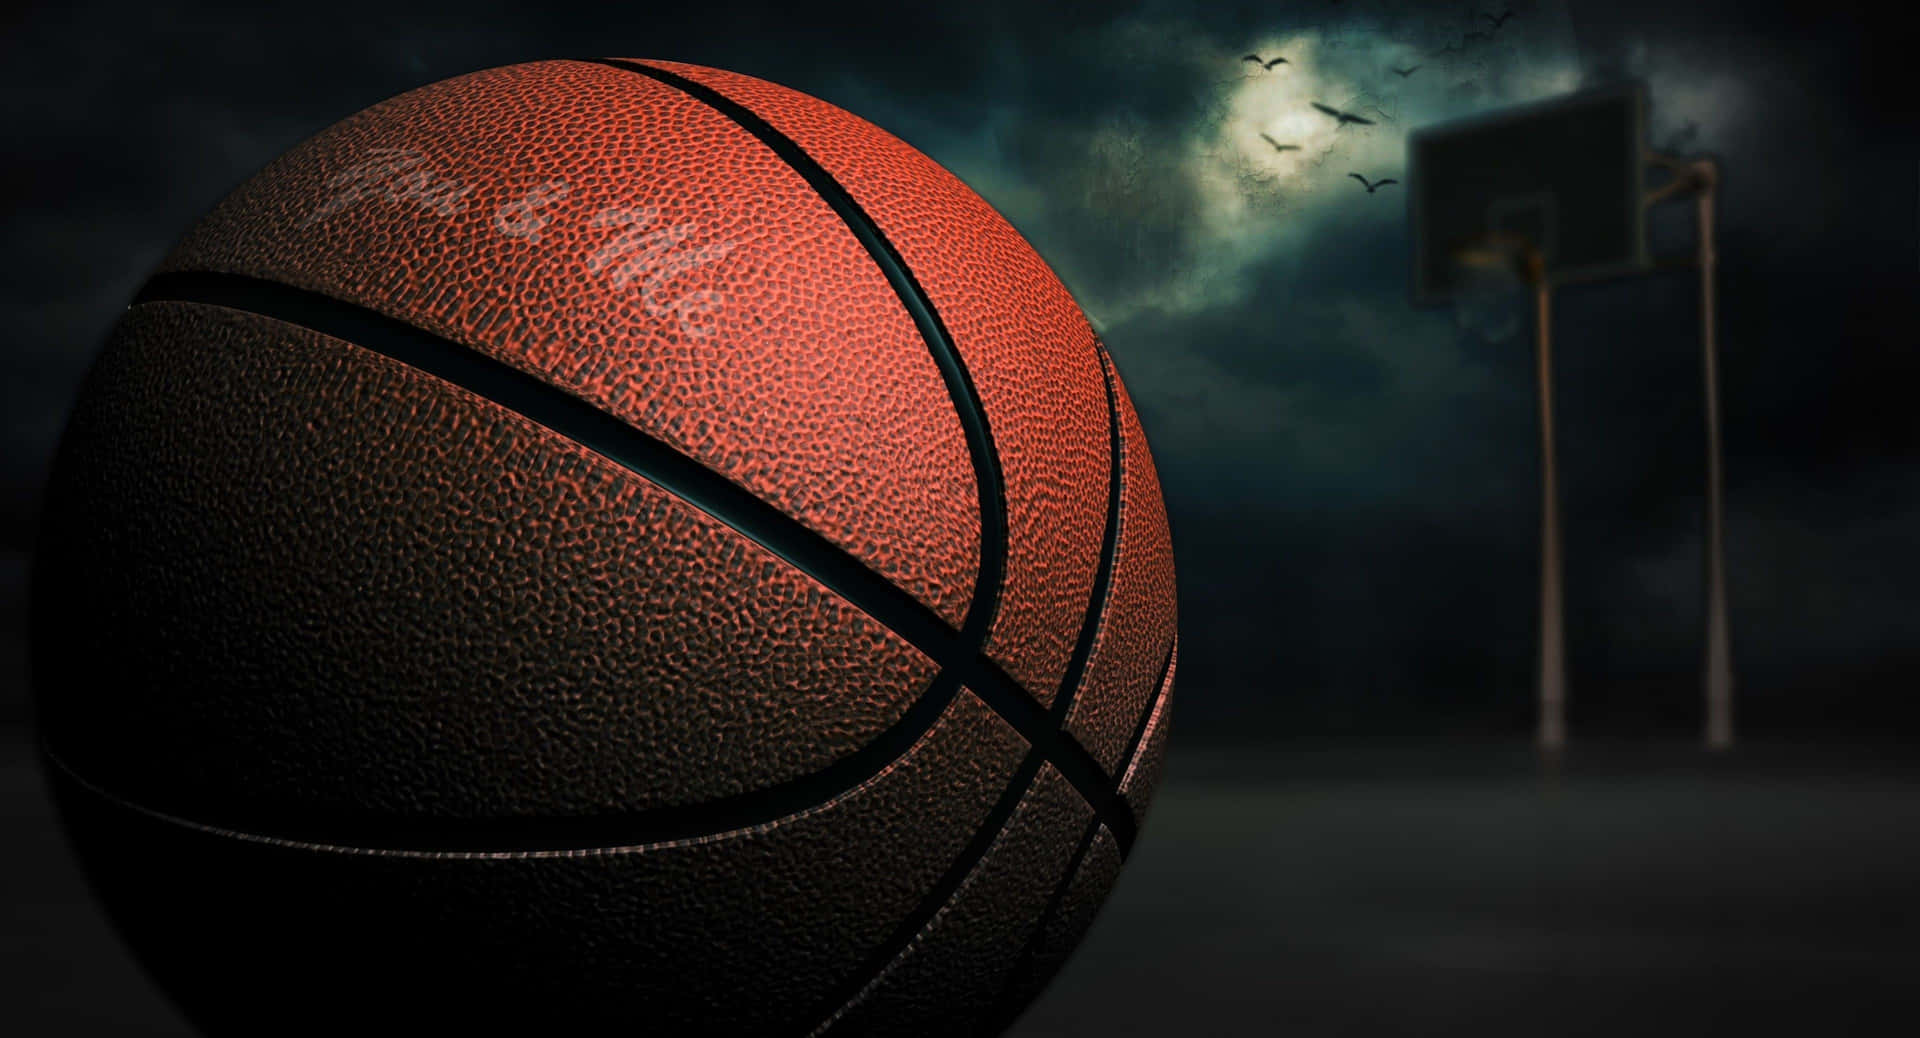 This 4k Basketball Background Will Make You Feel Like You’re Part of the Game